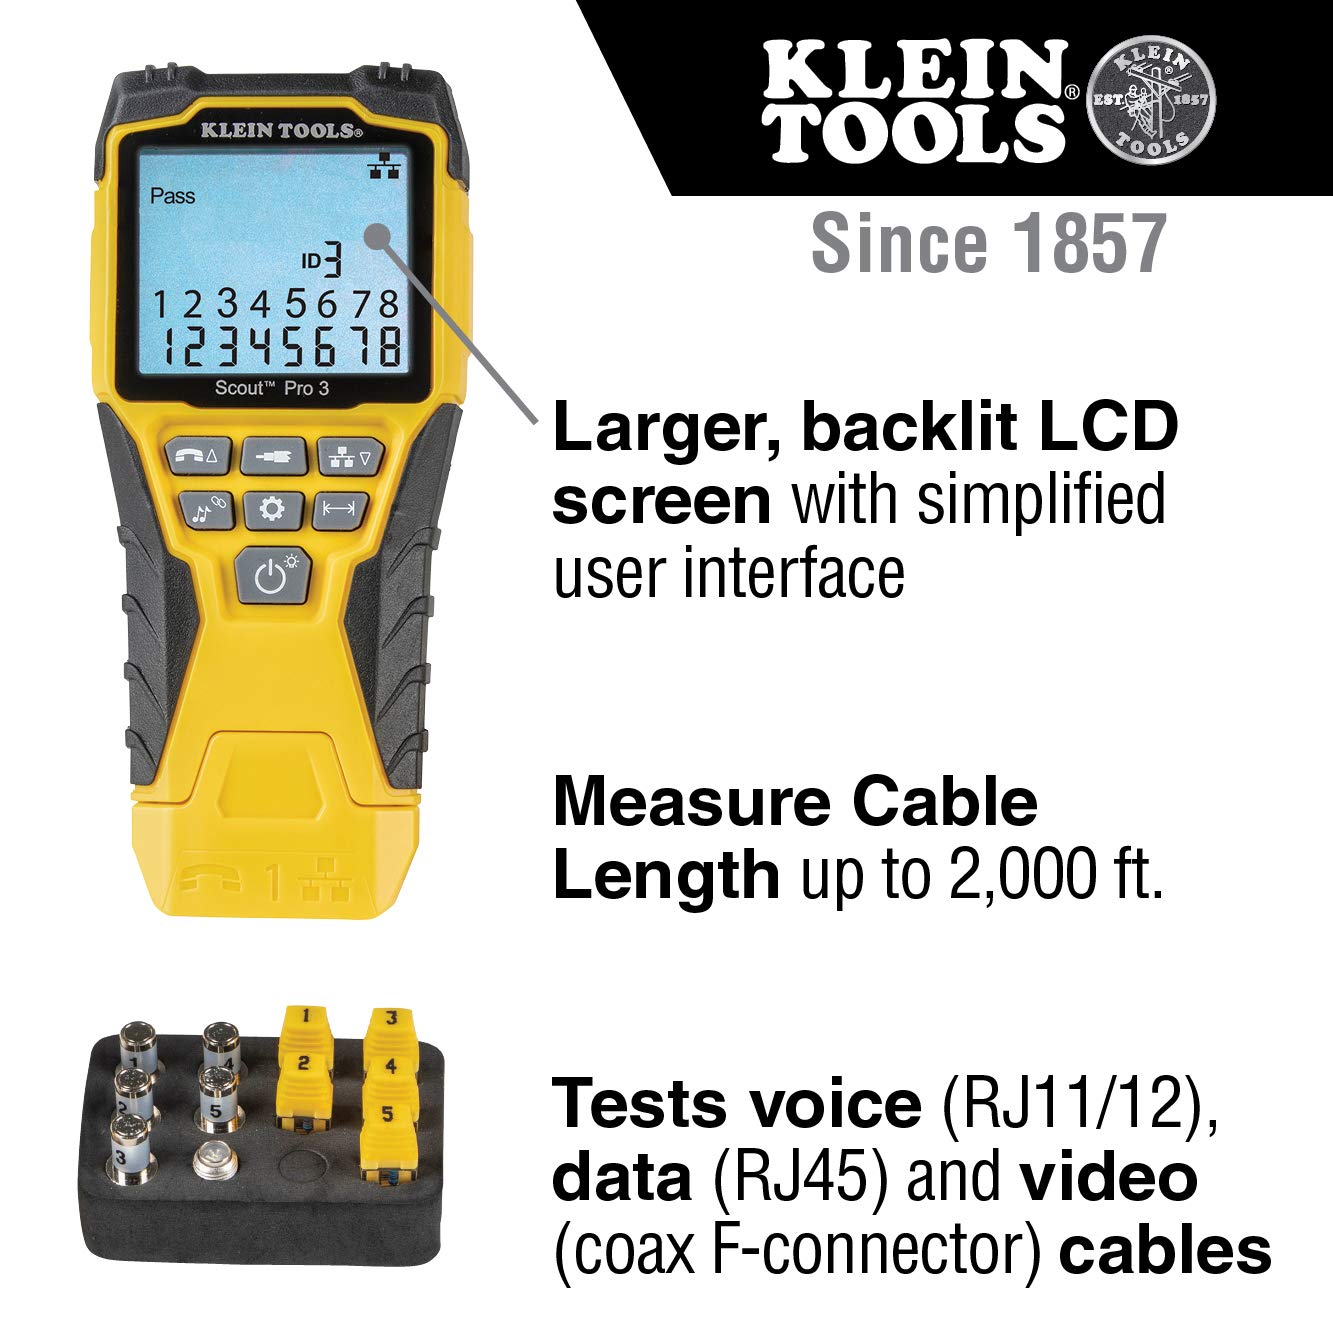 Klein Tools VDV501-853 CoaxialCable Tester, Scout Pro 3 with Test-n-Map Remote, Includes Remotes #2 - #6, Tests Voice, Data and Video Cable